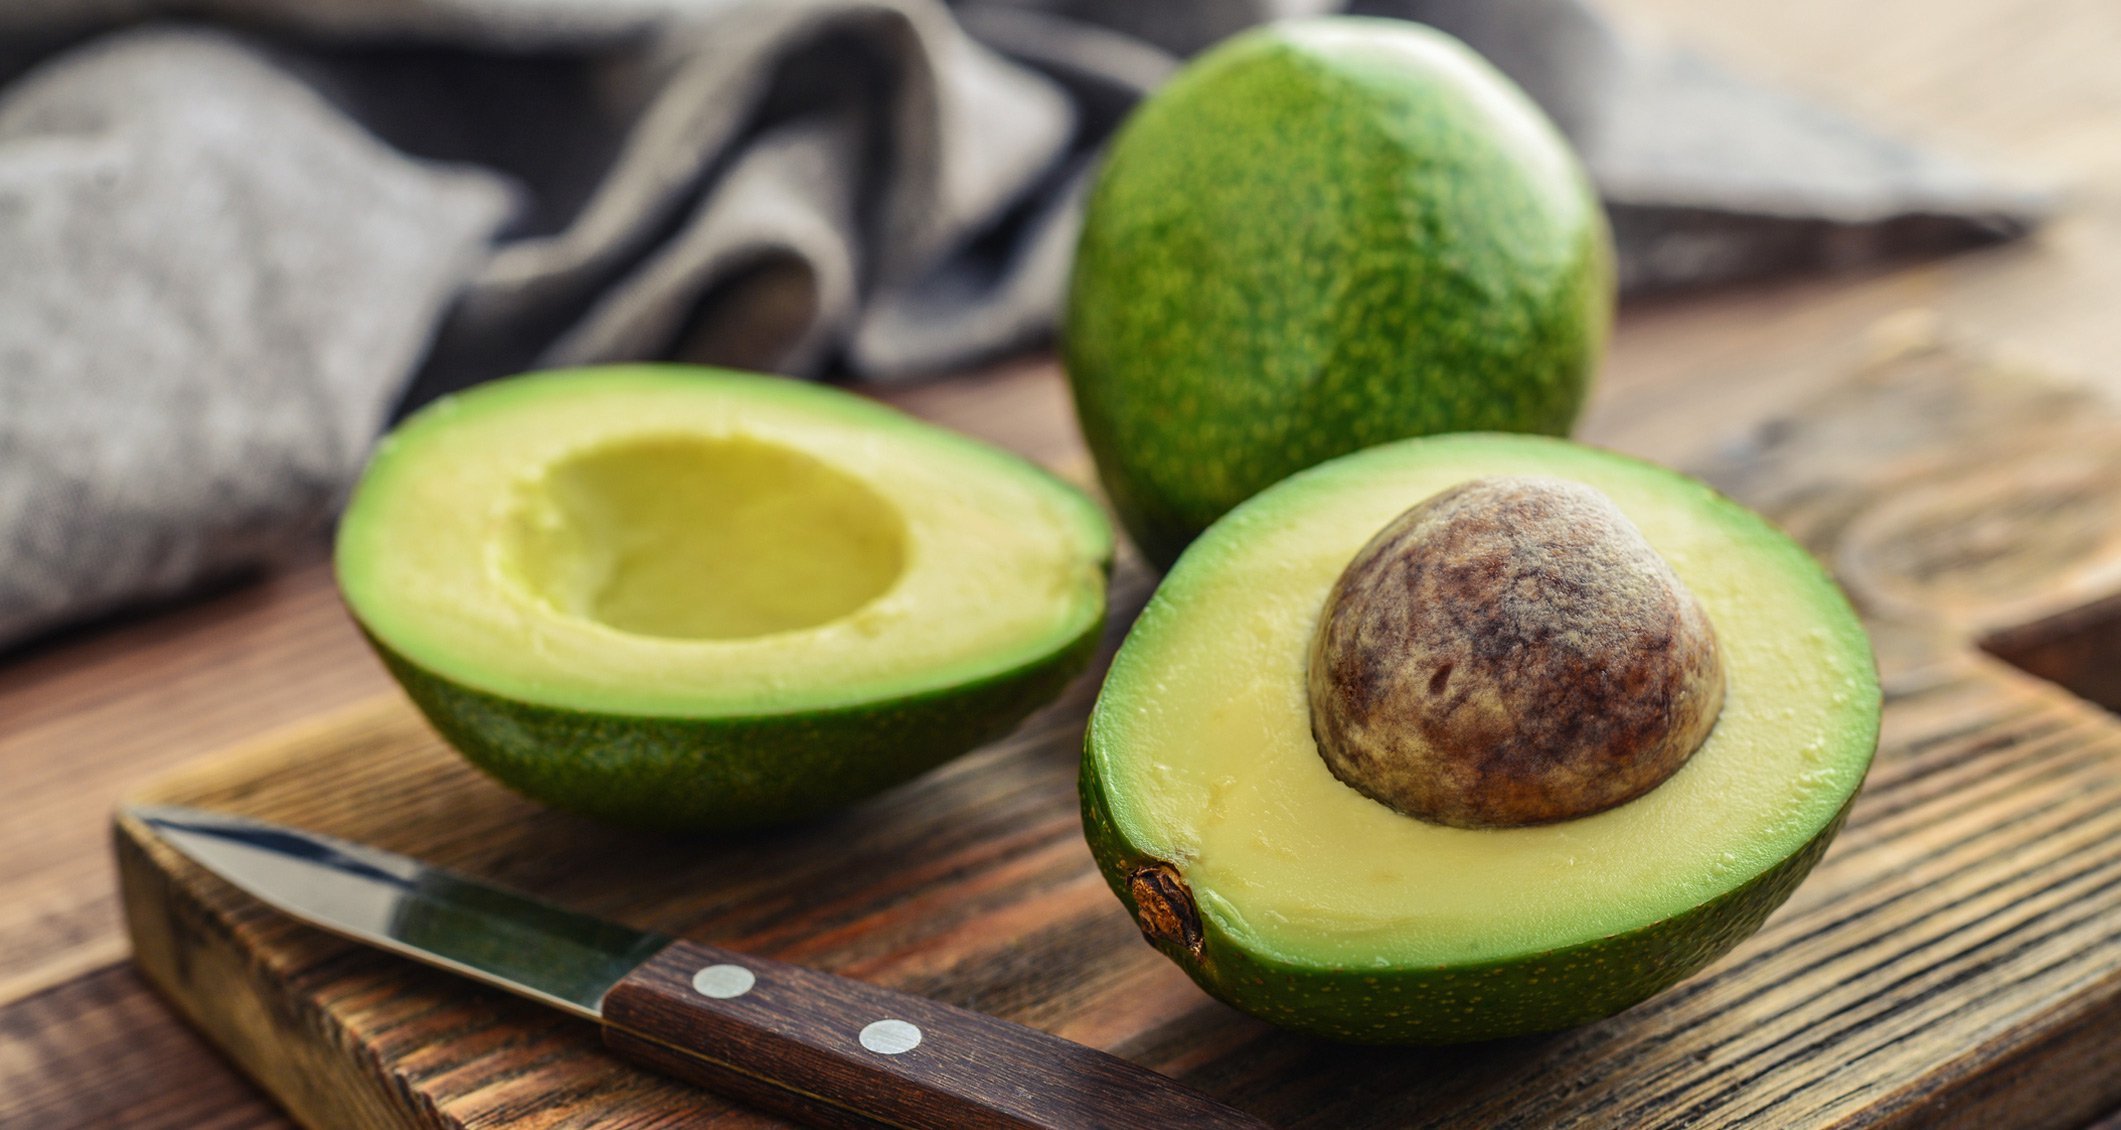 Avocado: The Creamy Superfood for a Healthy Lifestyle